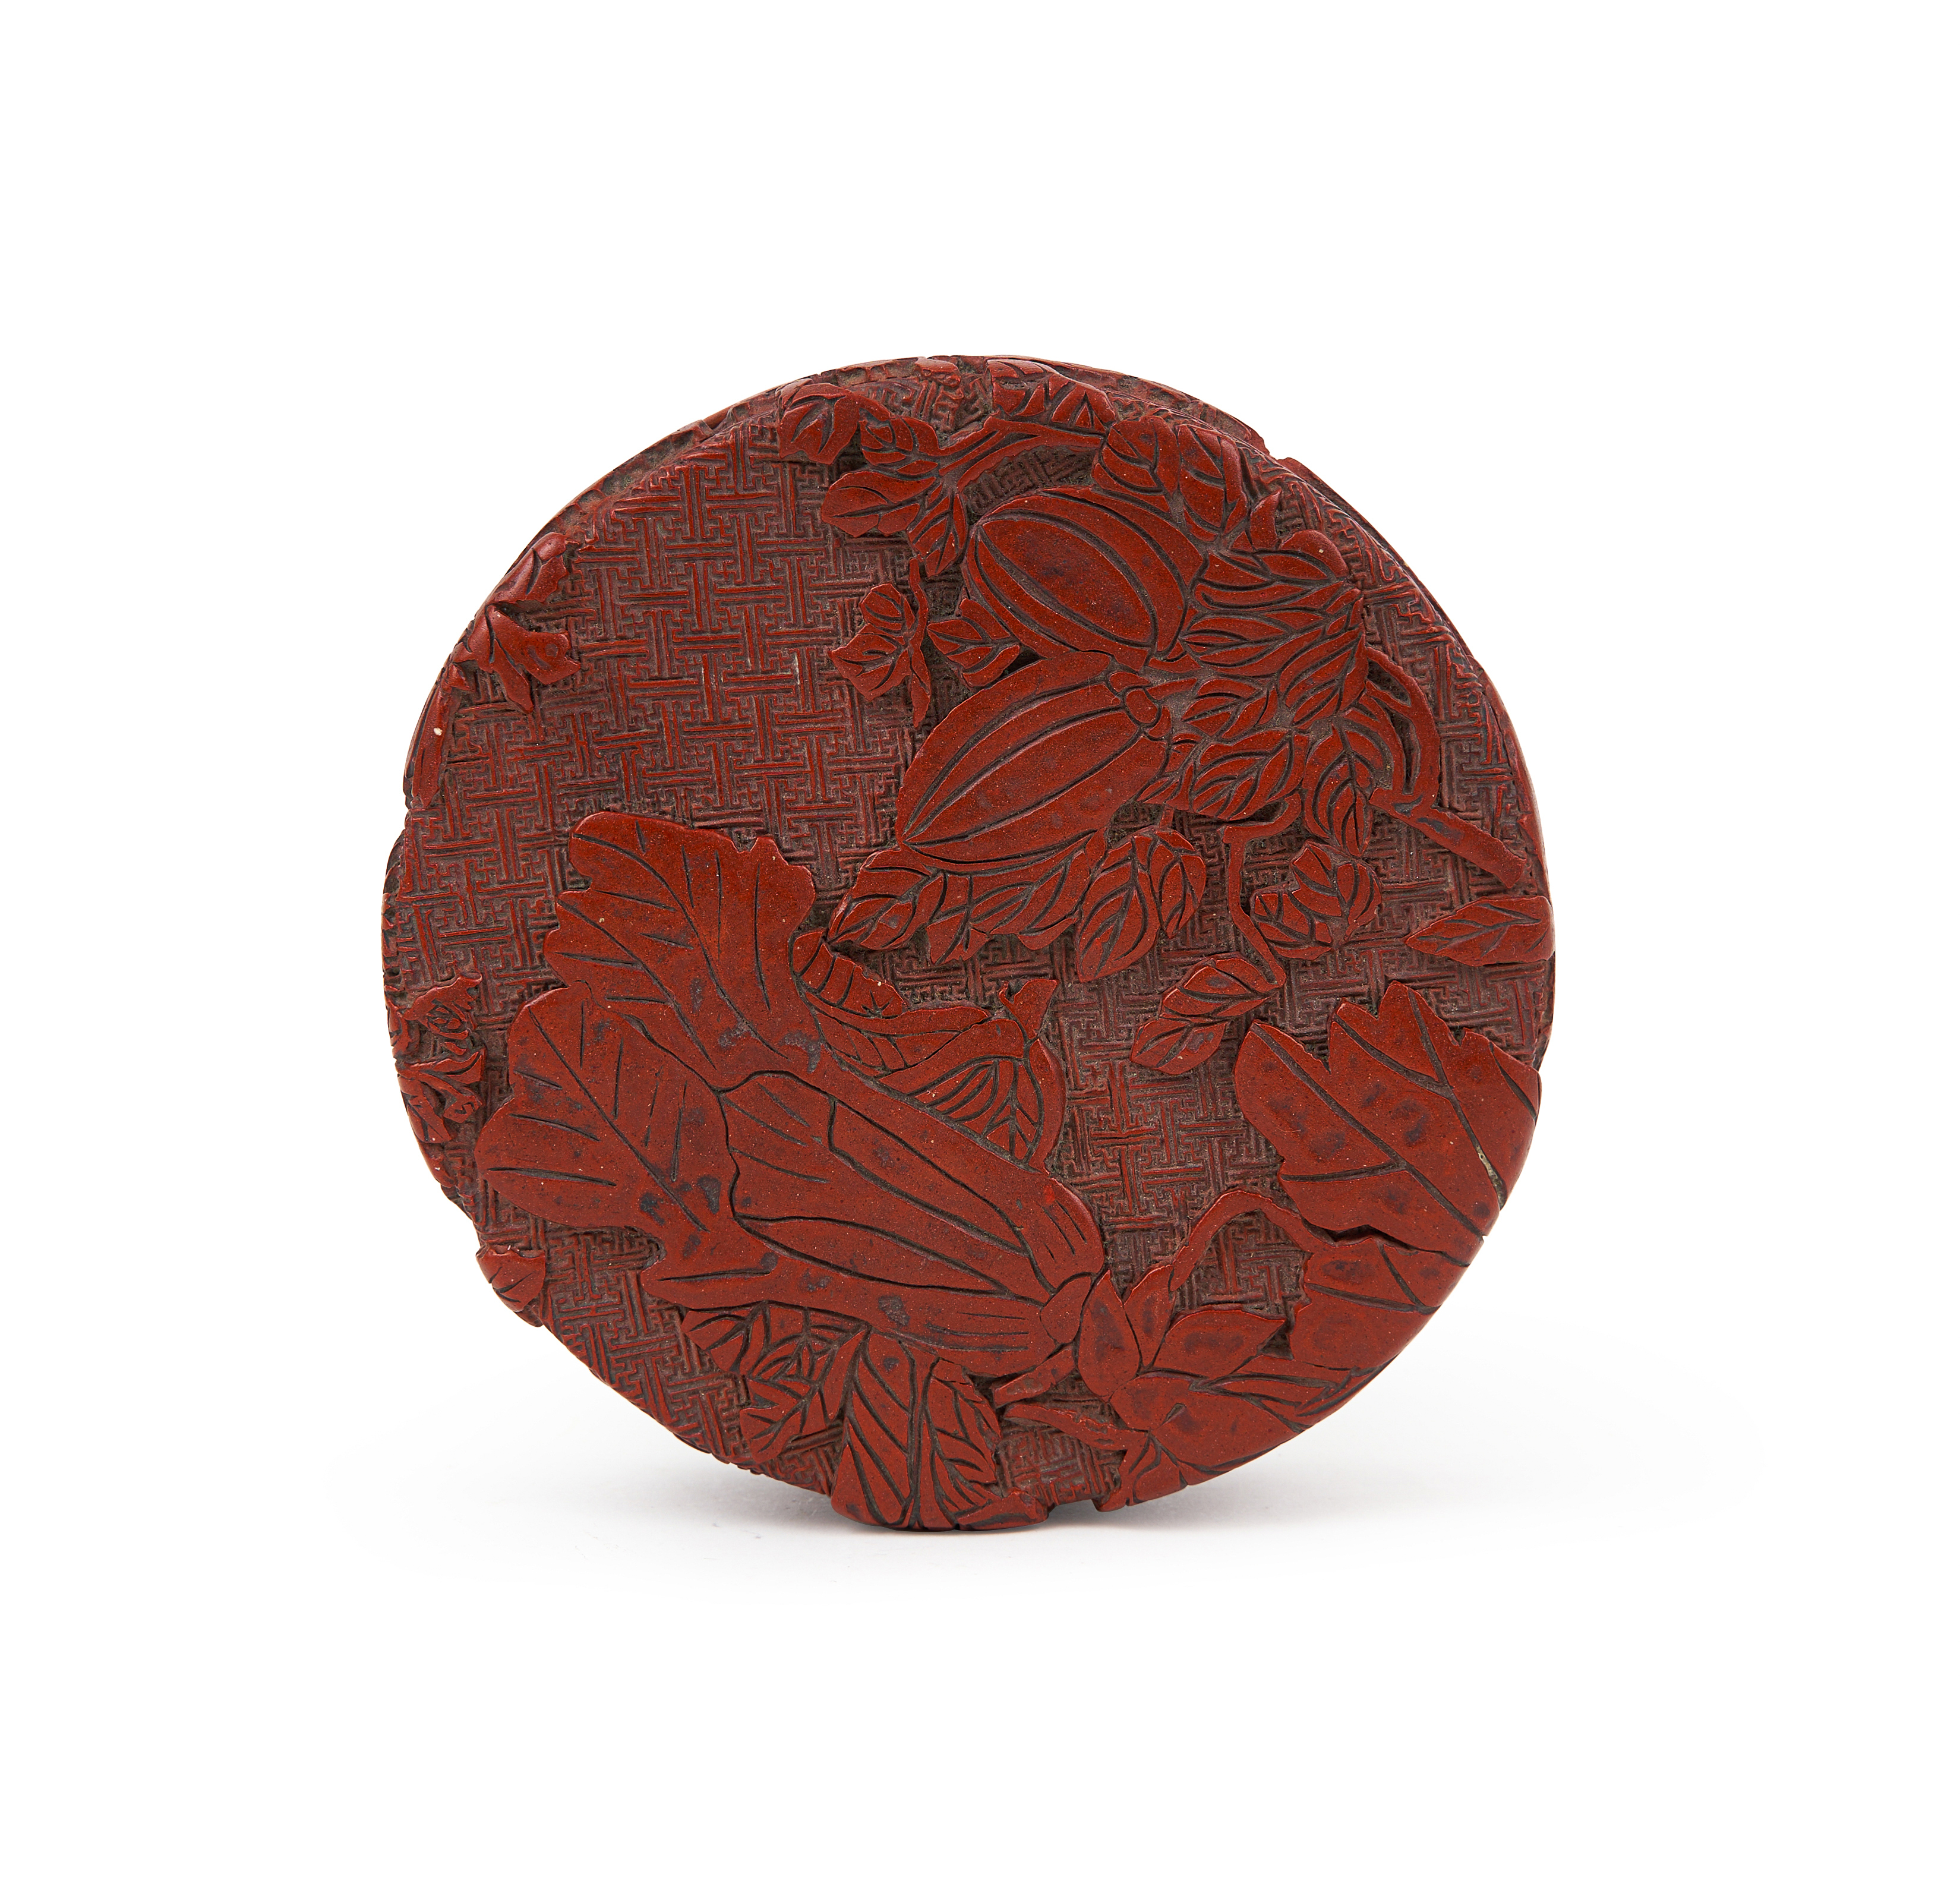 A LARGE CARVED CINNABAR LACQUER FLORAL BOX, QING DYNASTY (1644-1911)